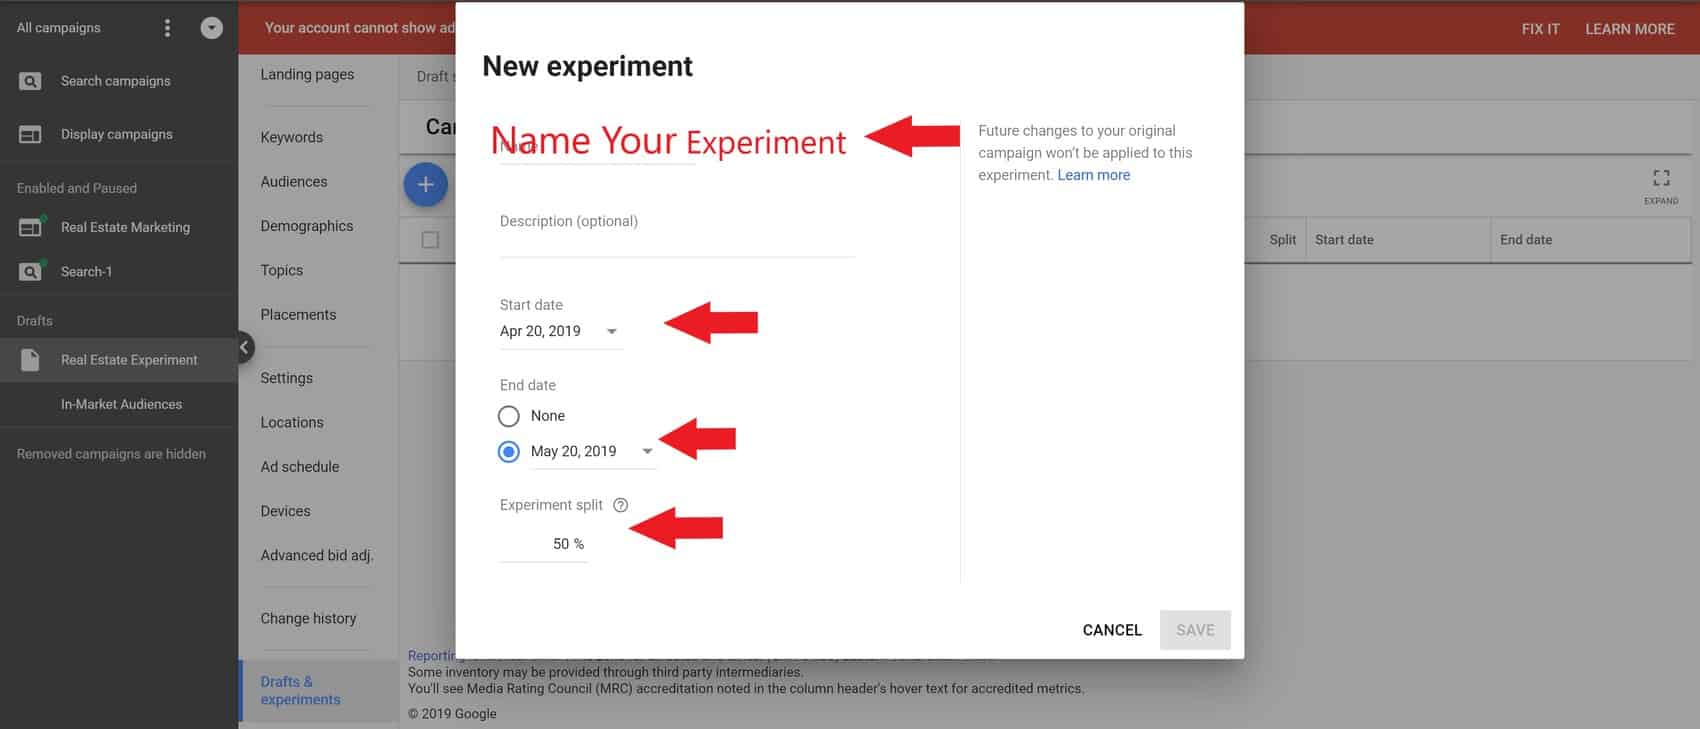 Add some details like name and description to your experiment